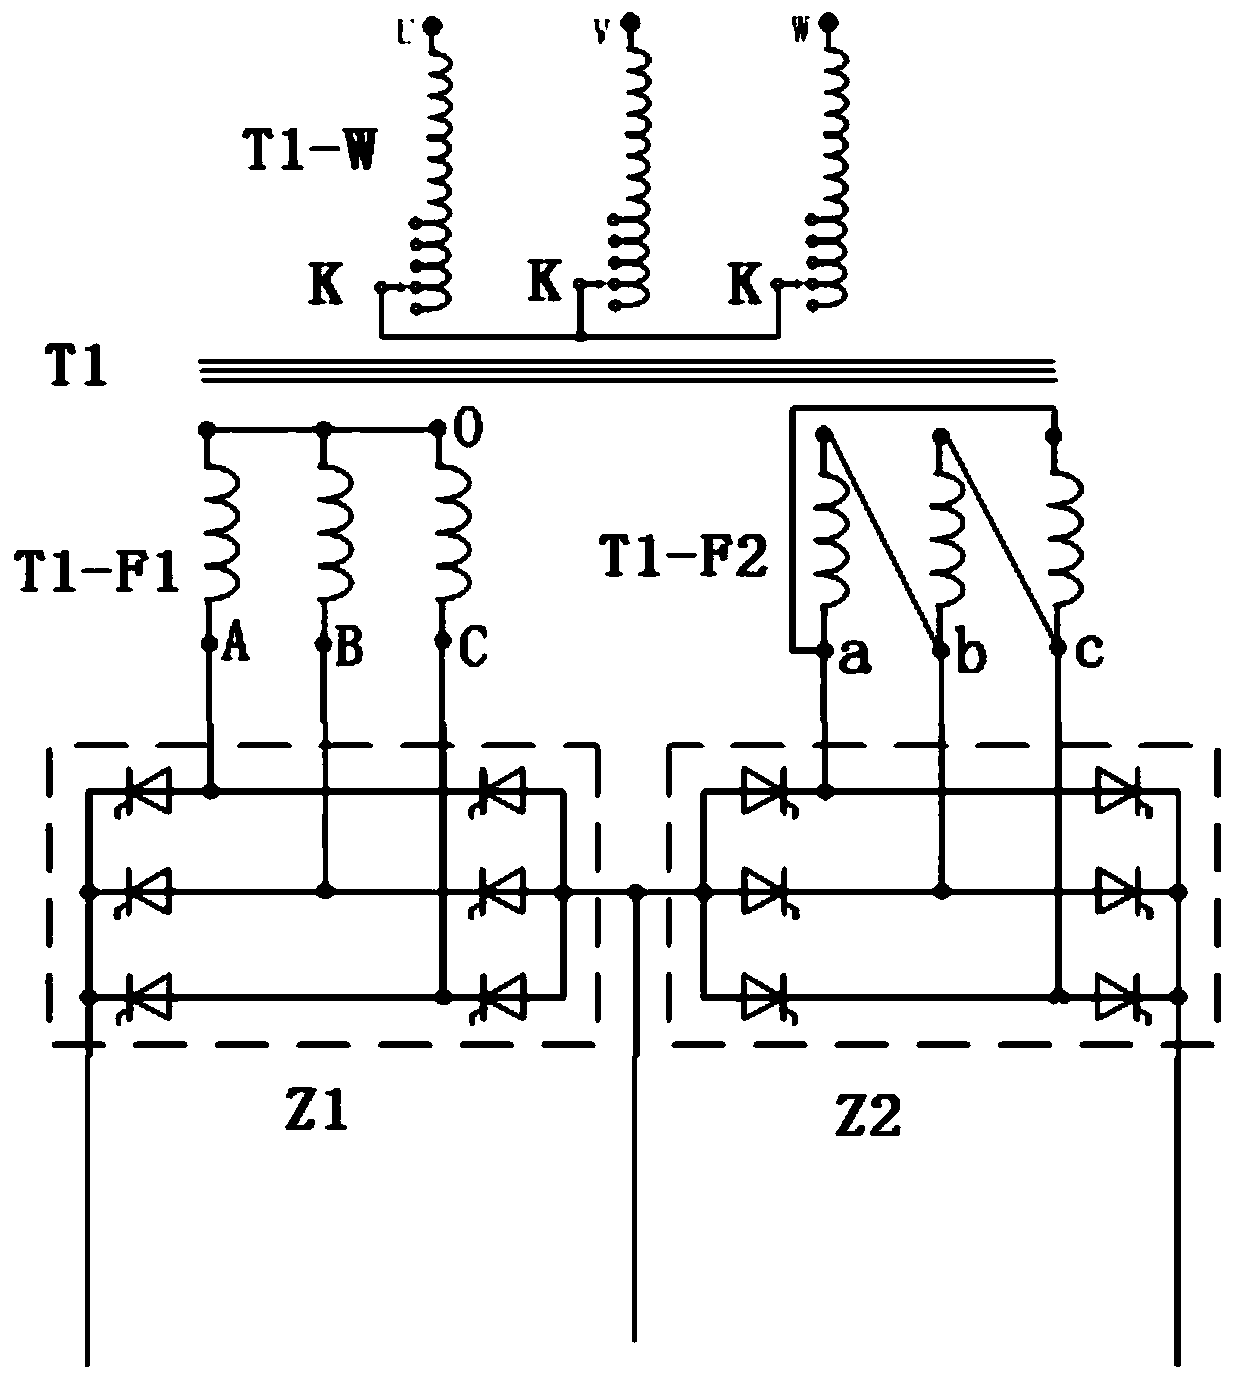 Single 12-pulse rectifier transformer and equivalent multi-phase rectifier unit formed by same